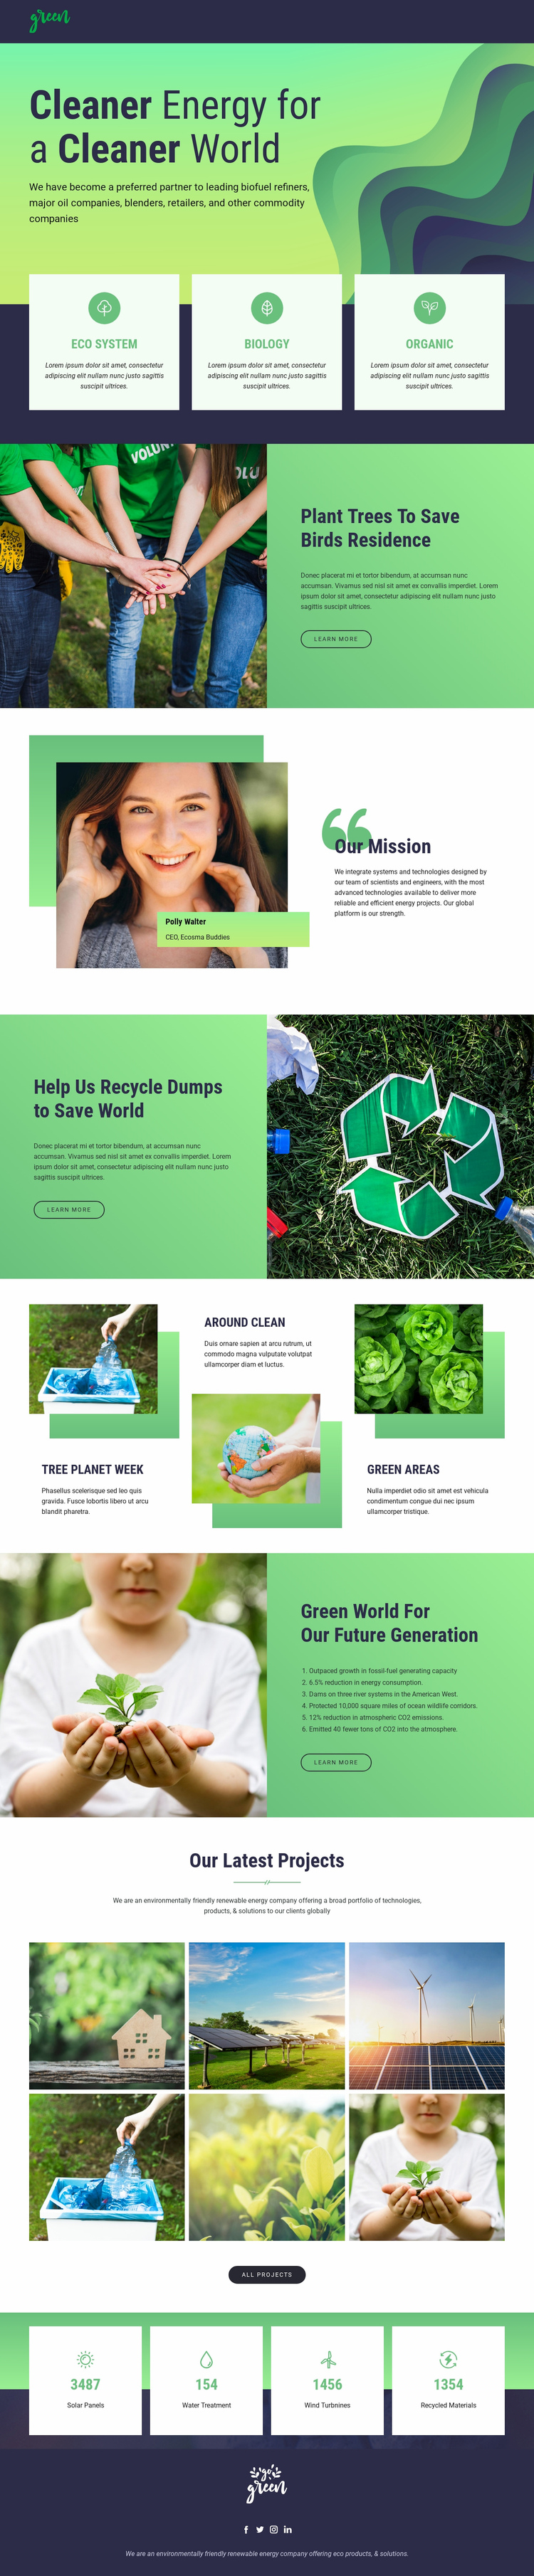 Clean energy to save nature Squarespace Template Alternative